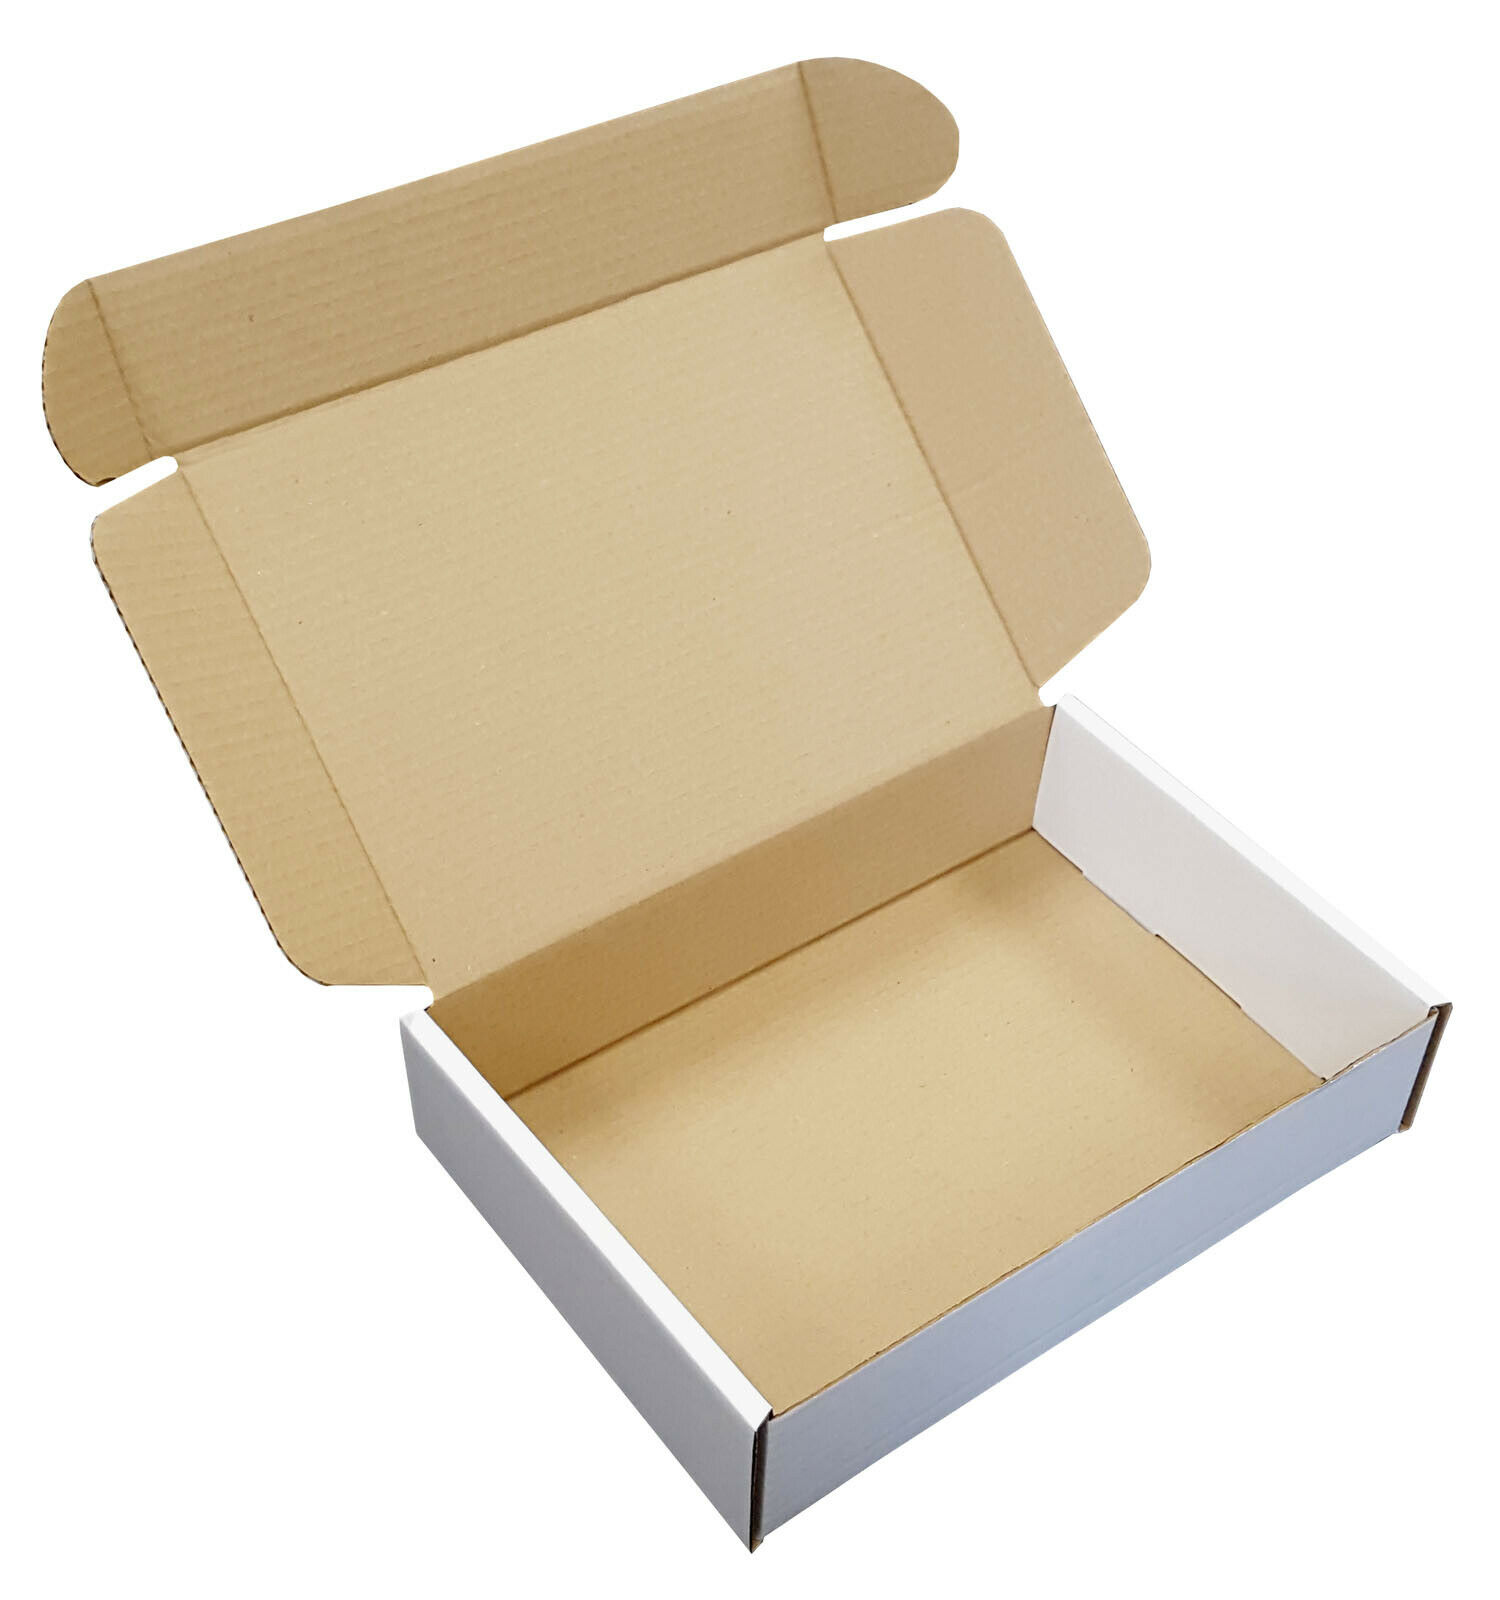 310mm x 220mm x 70mm White Small Parcel Die Cut Postal Mailing Shipping Boxes